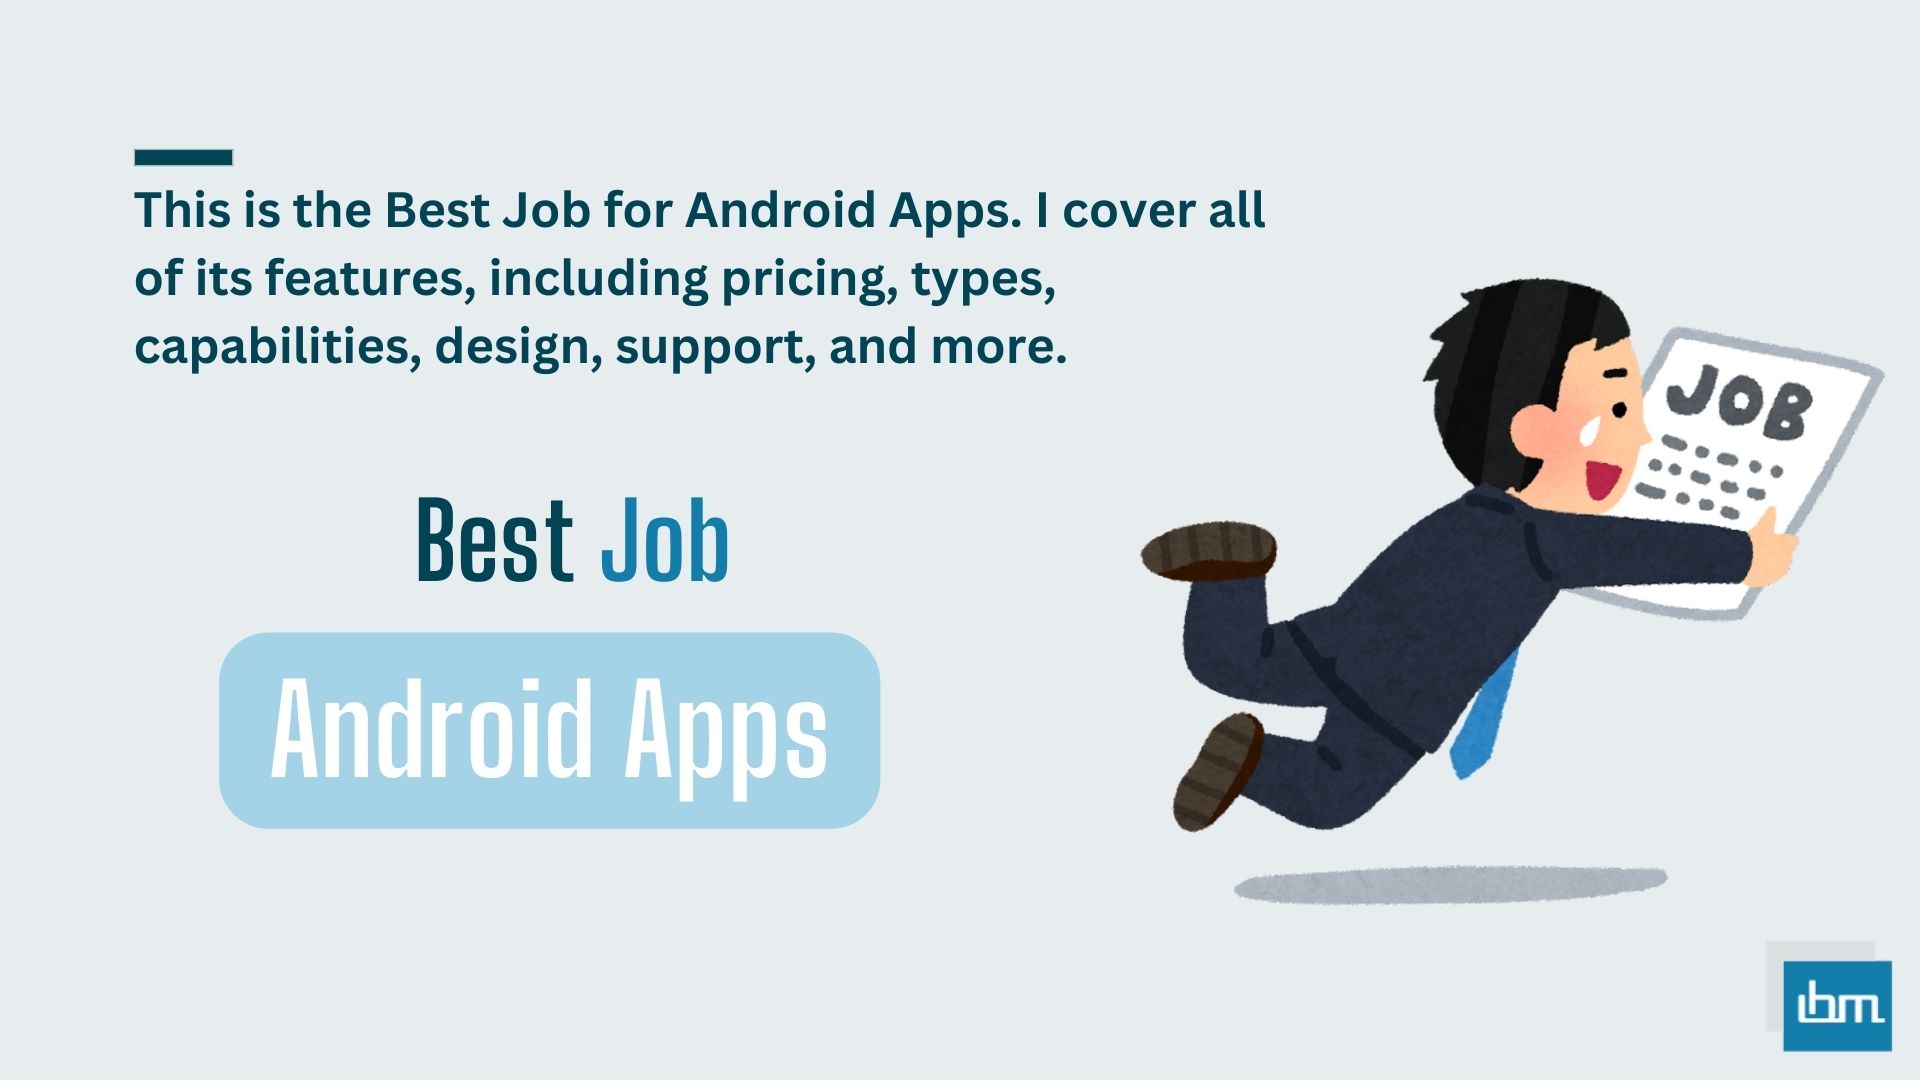 Best Job for Android Apps